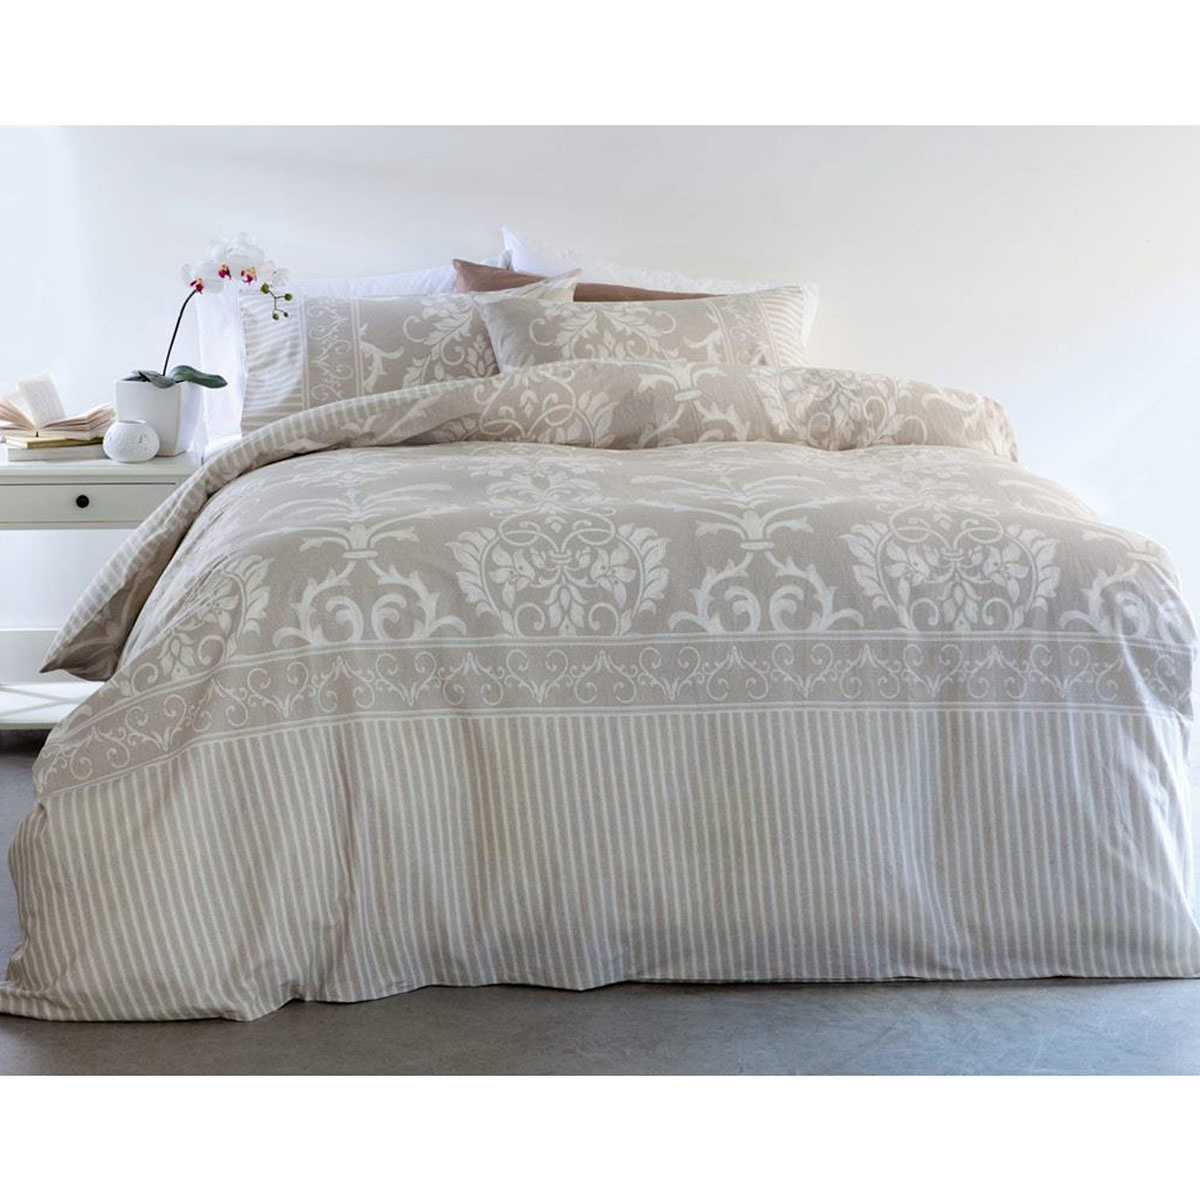 Damask Quilt Cover Set - Queen Bed